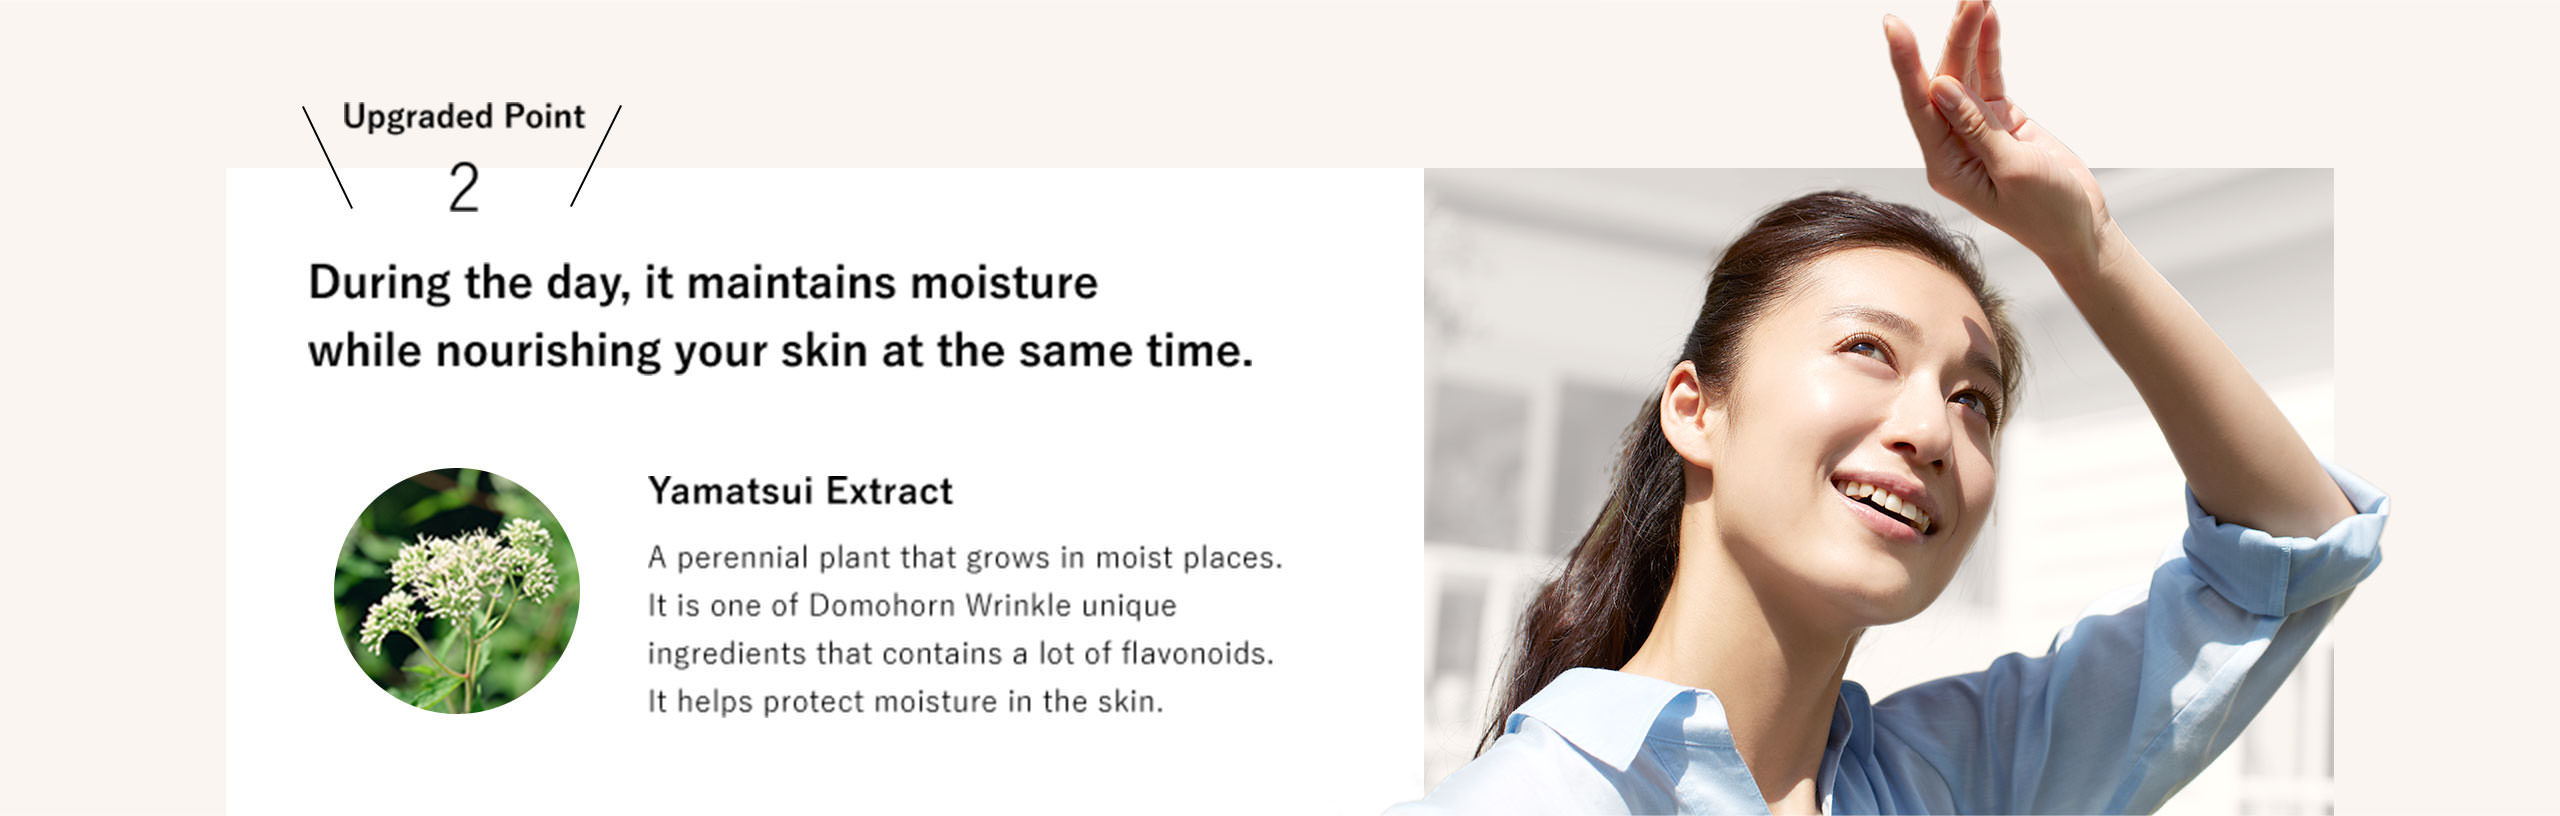 Upgraded Point 2: During the day, it maintains moisture while nourishing your skin at the same time.